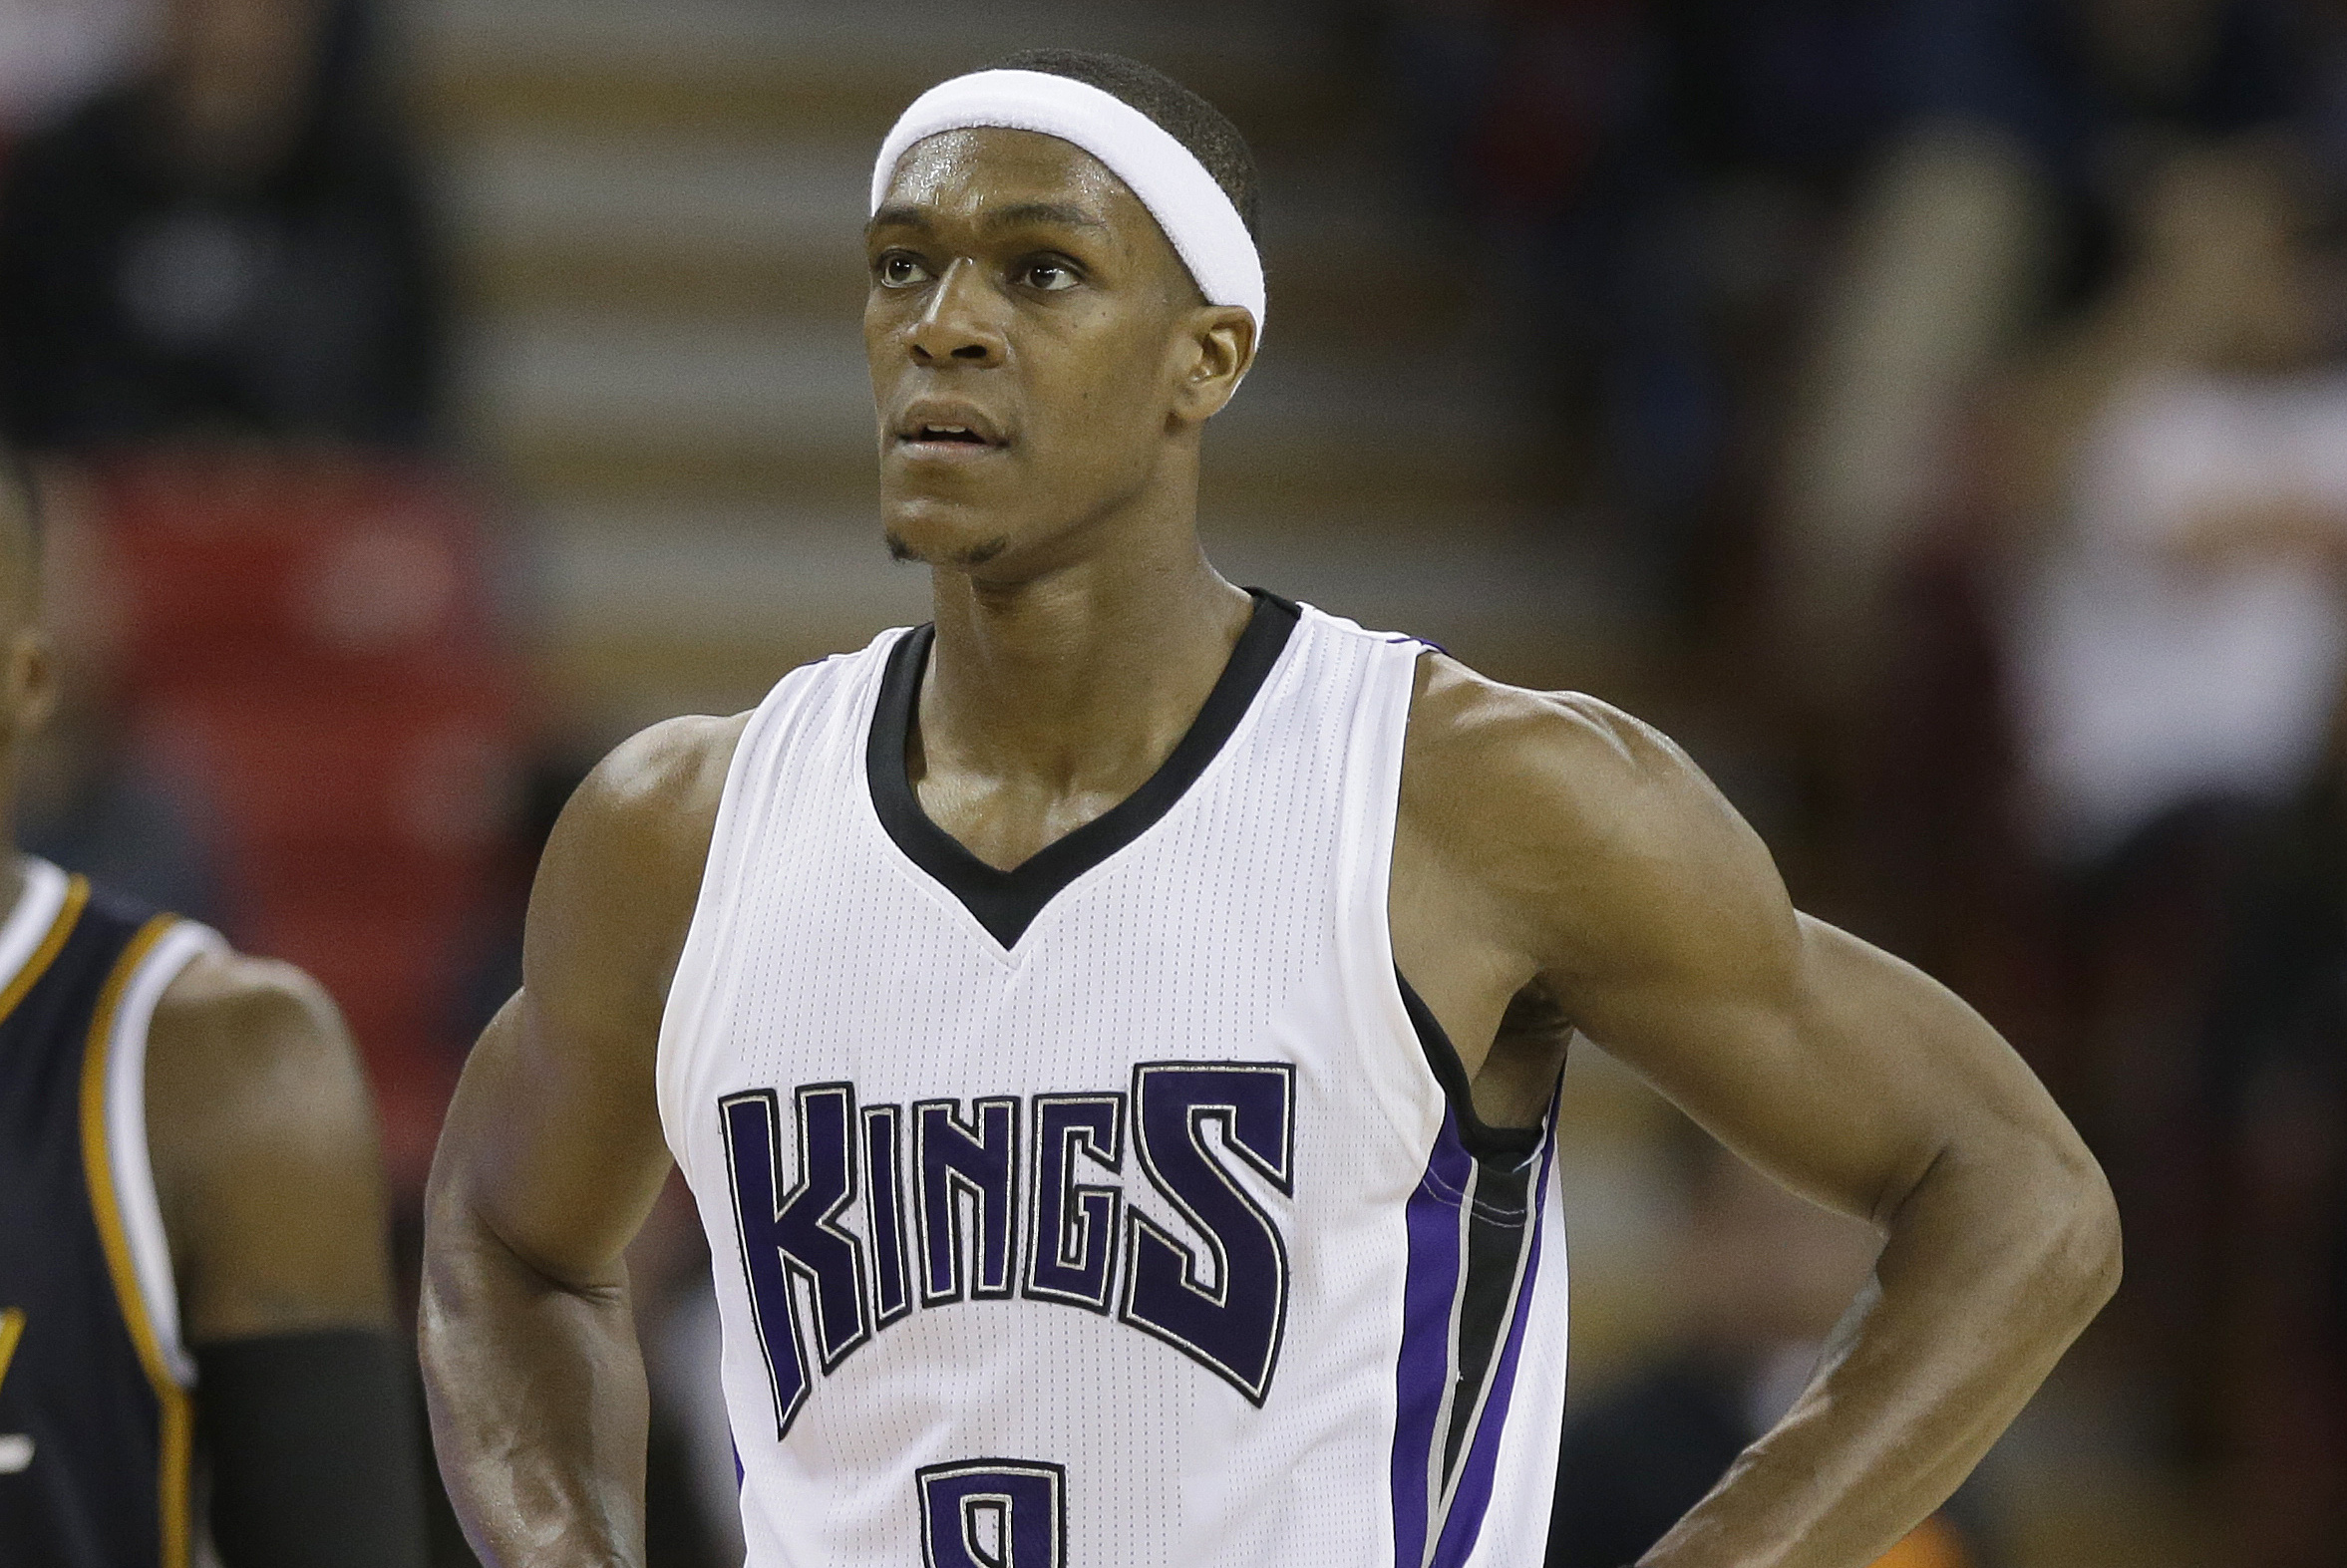 The Bulls Made a Huge Mistake By Signing Rajon Rondo